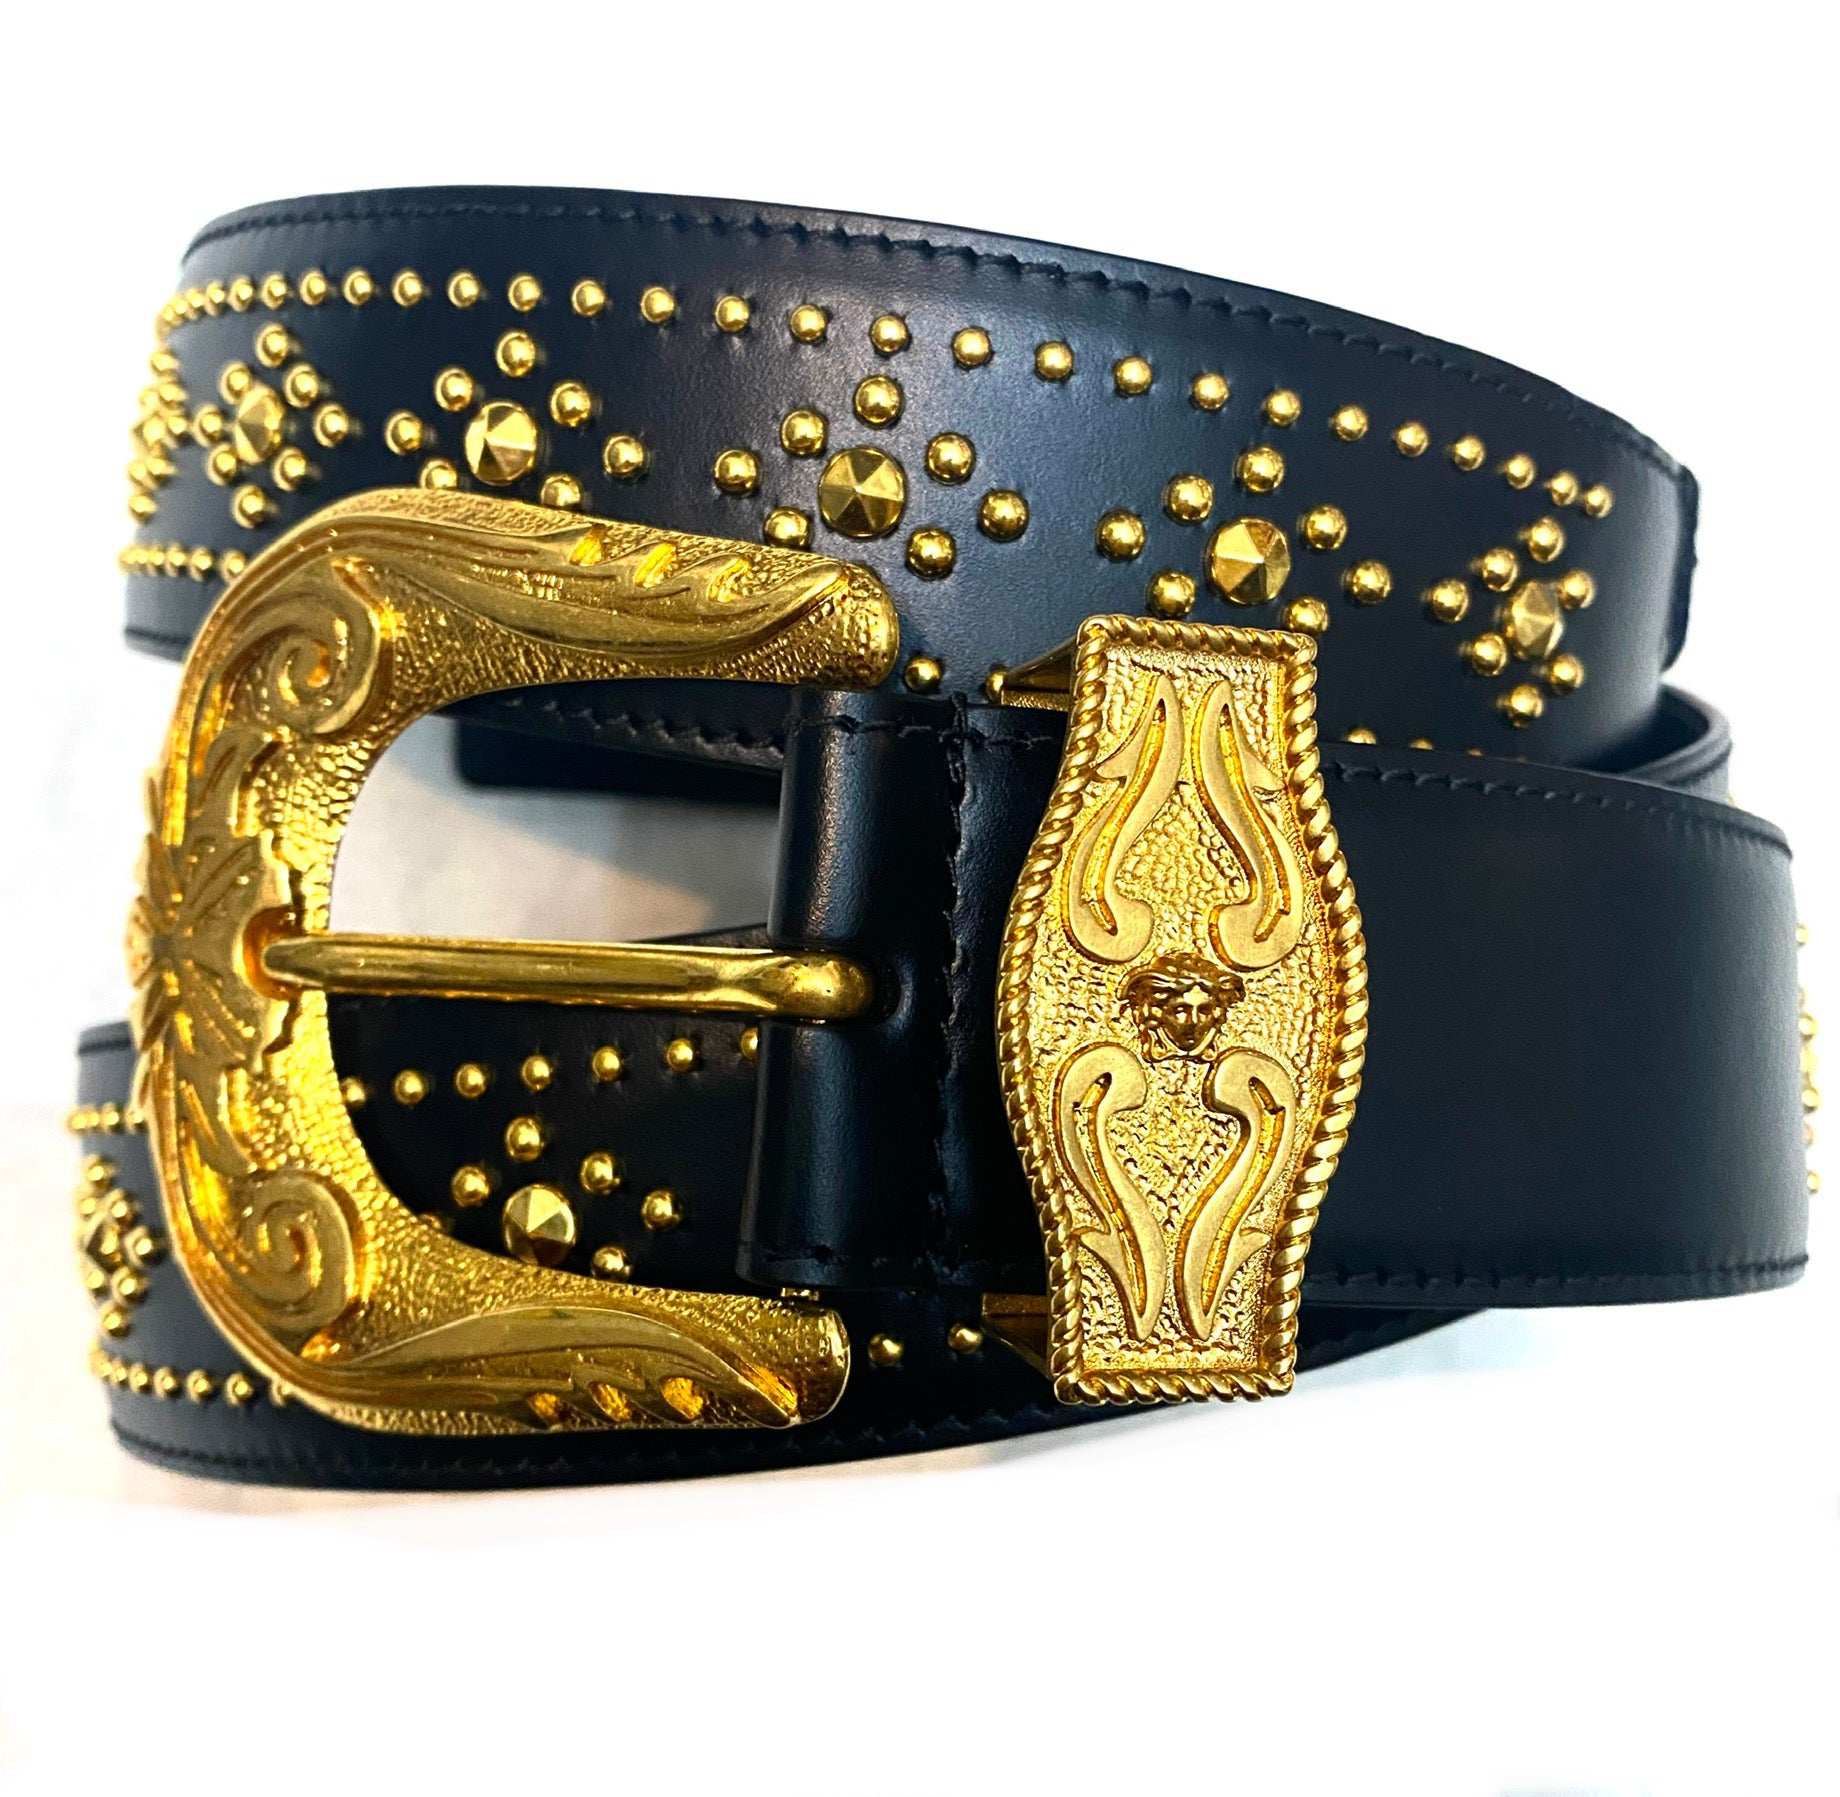 The 5 Reasons You Need A BB Simon Belt In Your Wardrobe